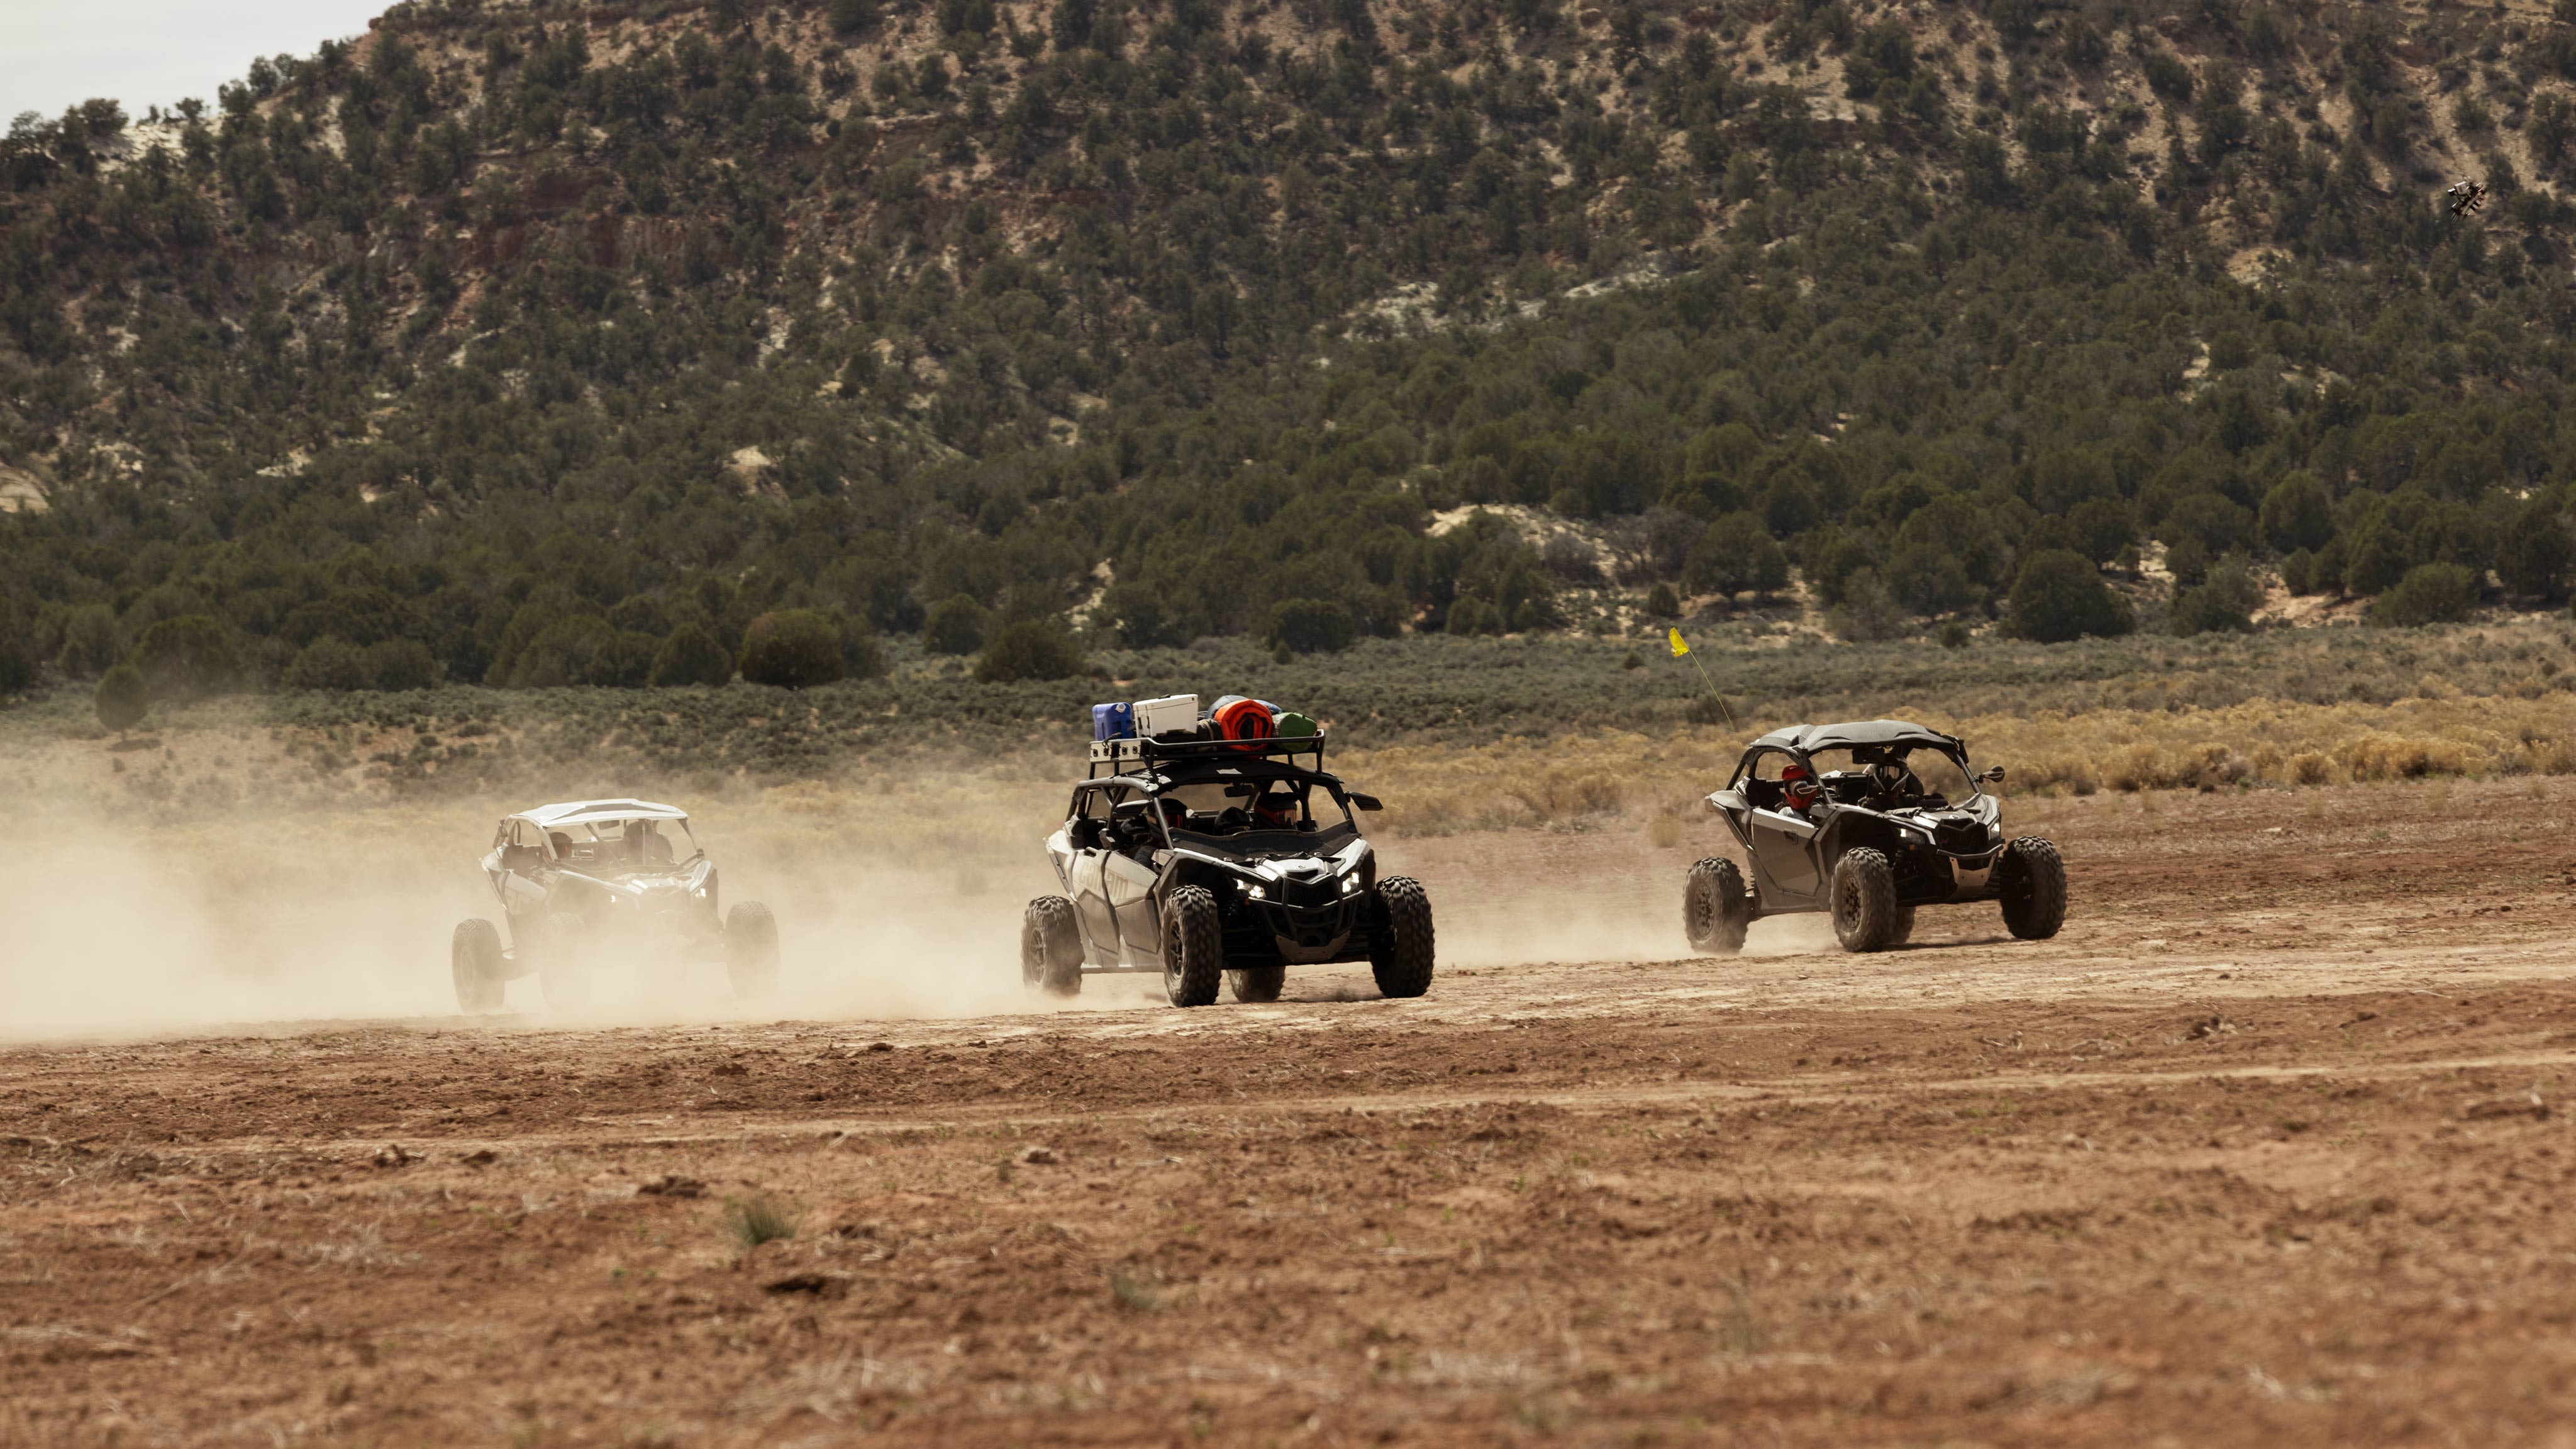 Three Can-Am Side-by-side vehicles riding in the desert